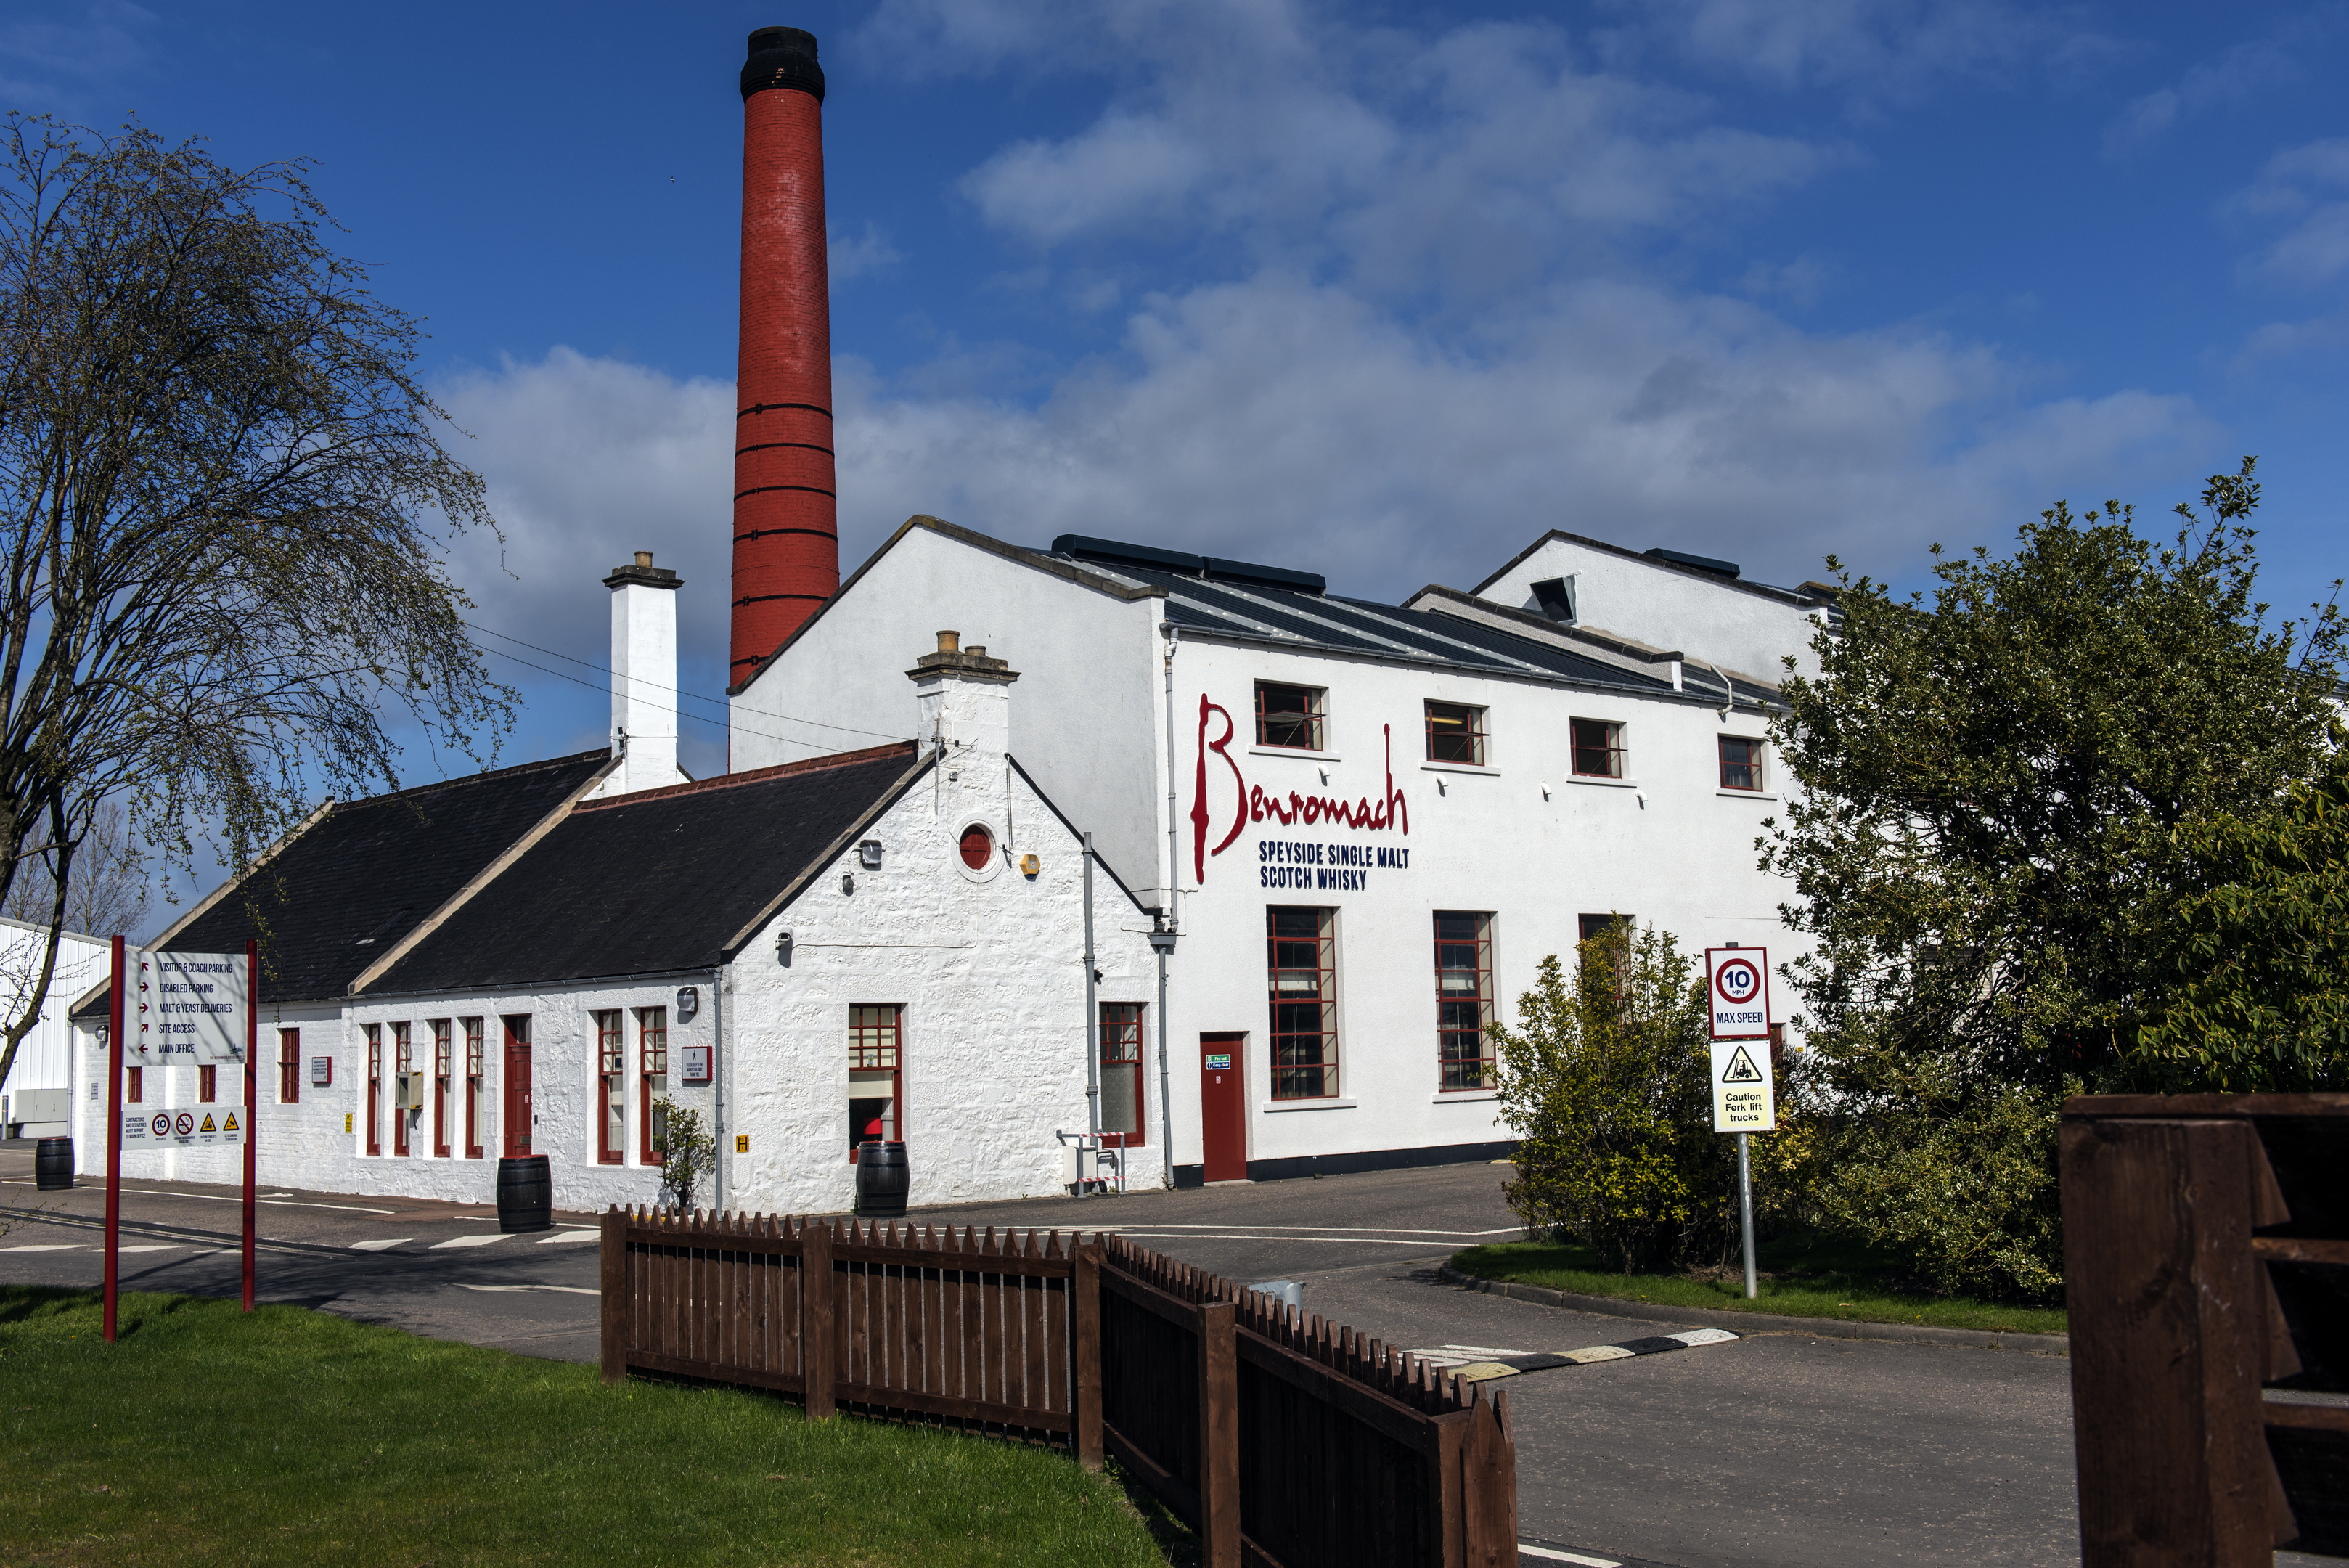 Benromach Distillery reopened in the 1990s.